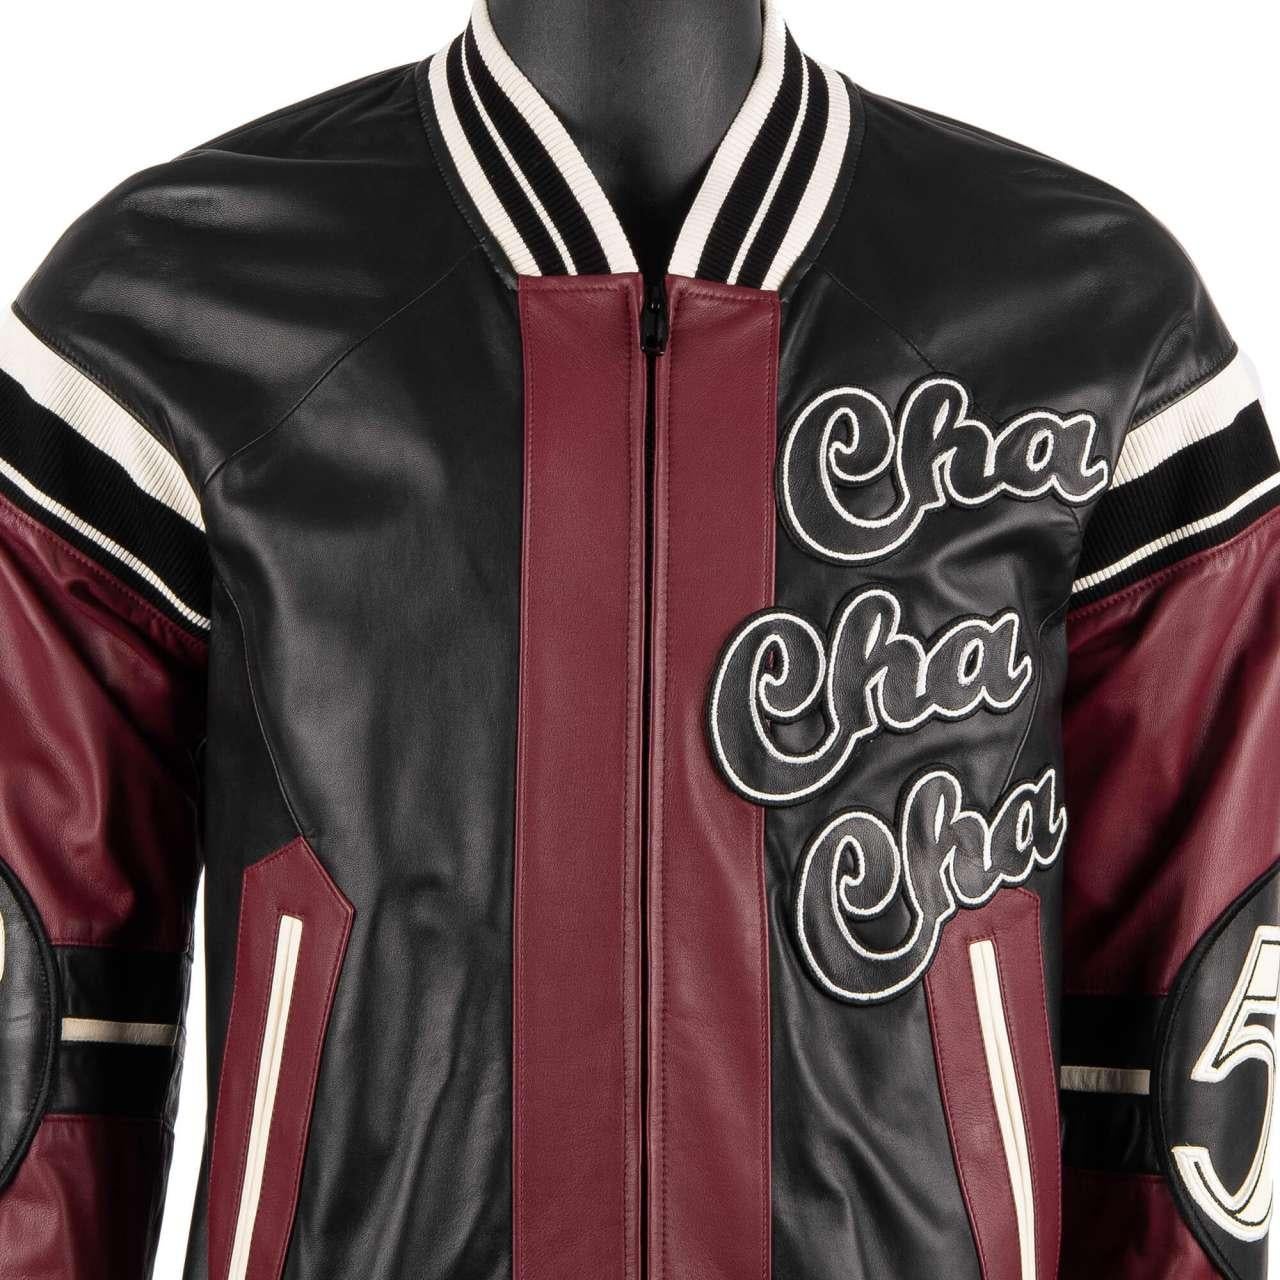 D&G Club Lounge Cello Embroidered Bomber Leather Jacket Black Bordeaux 44 For Sale 1